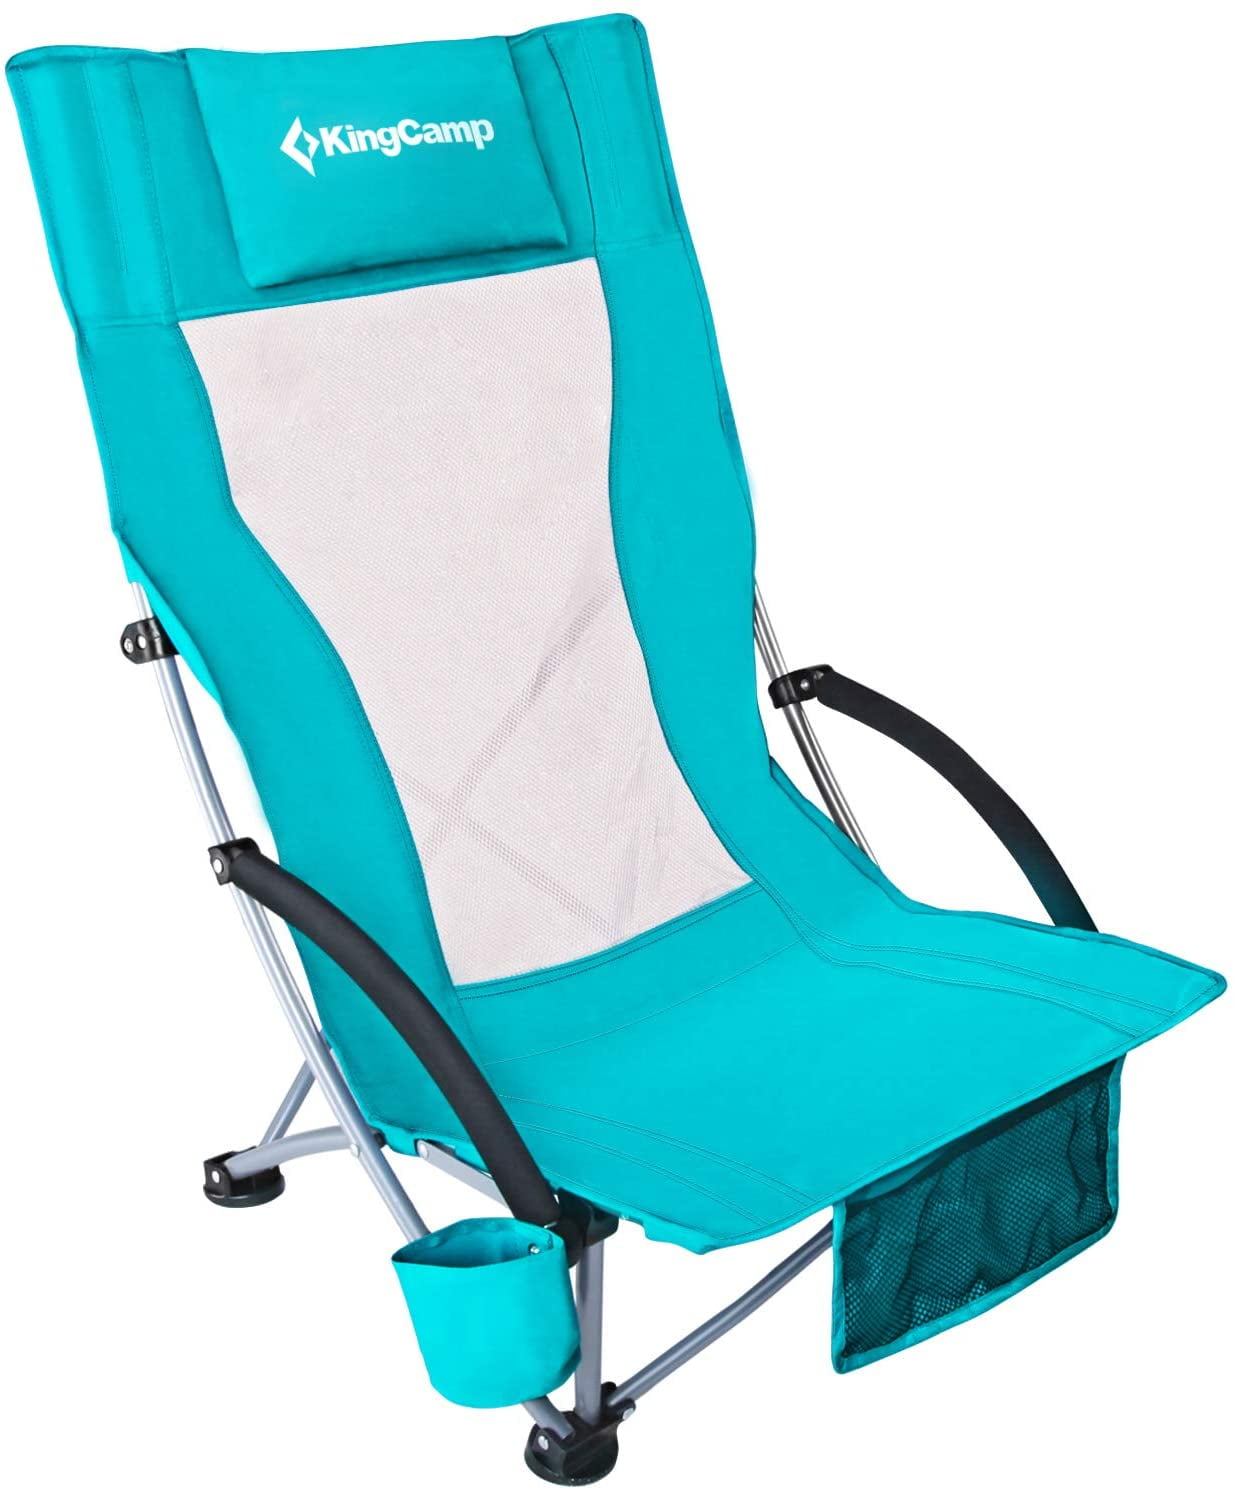 Simple Kingcamp Low Sling Beach Camping Folding Chair With Mesh Back with Simple Decor